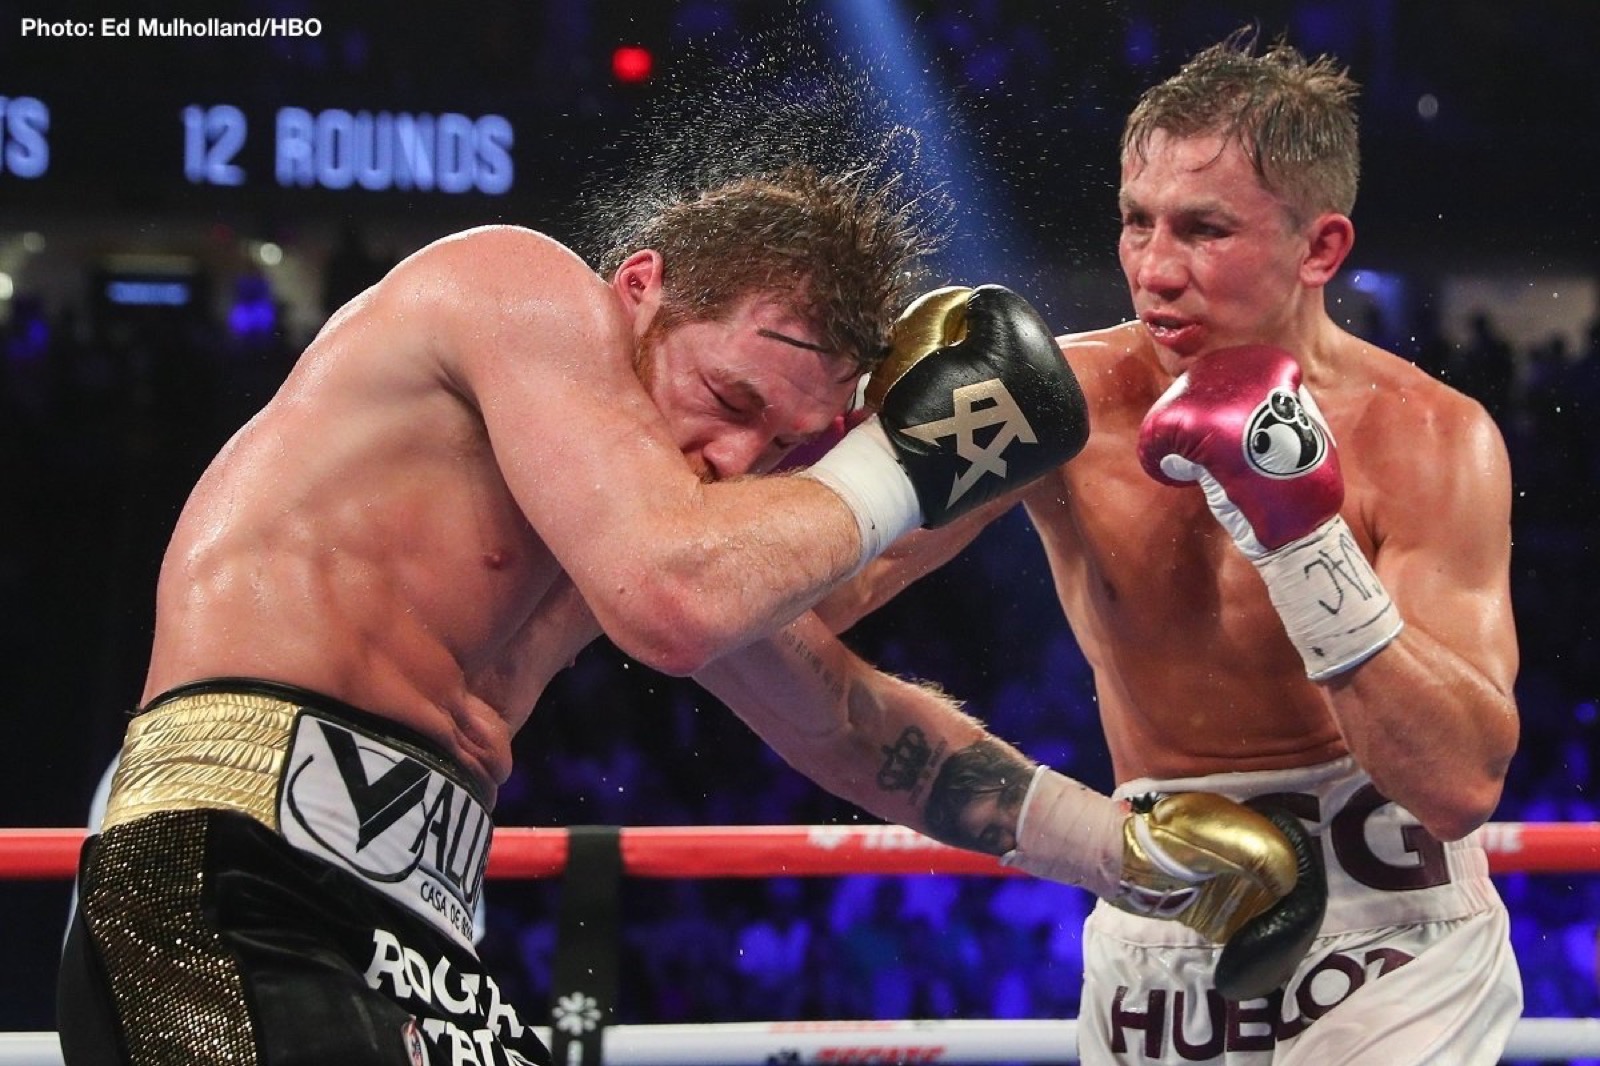 Image: Golovkin unsure what he needs to change to beat Canelo